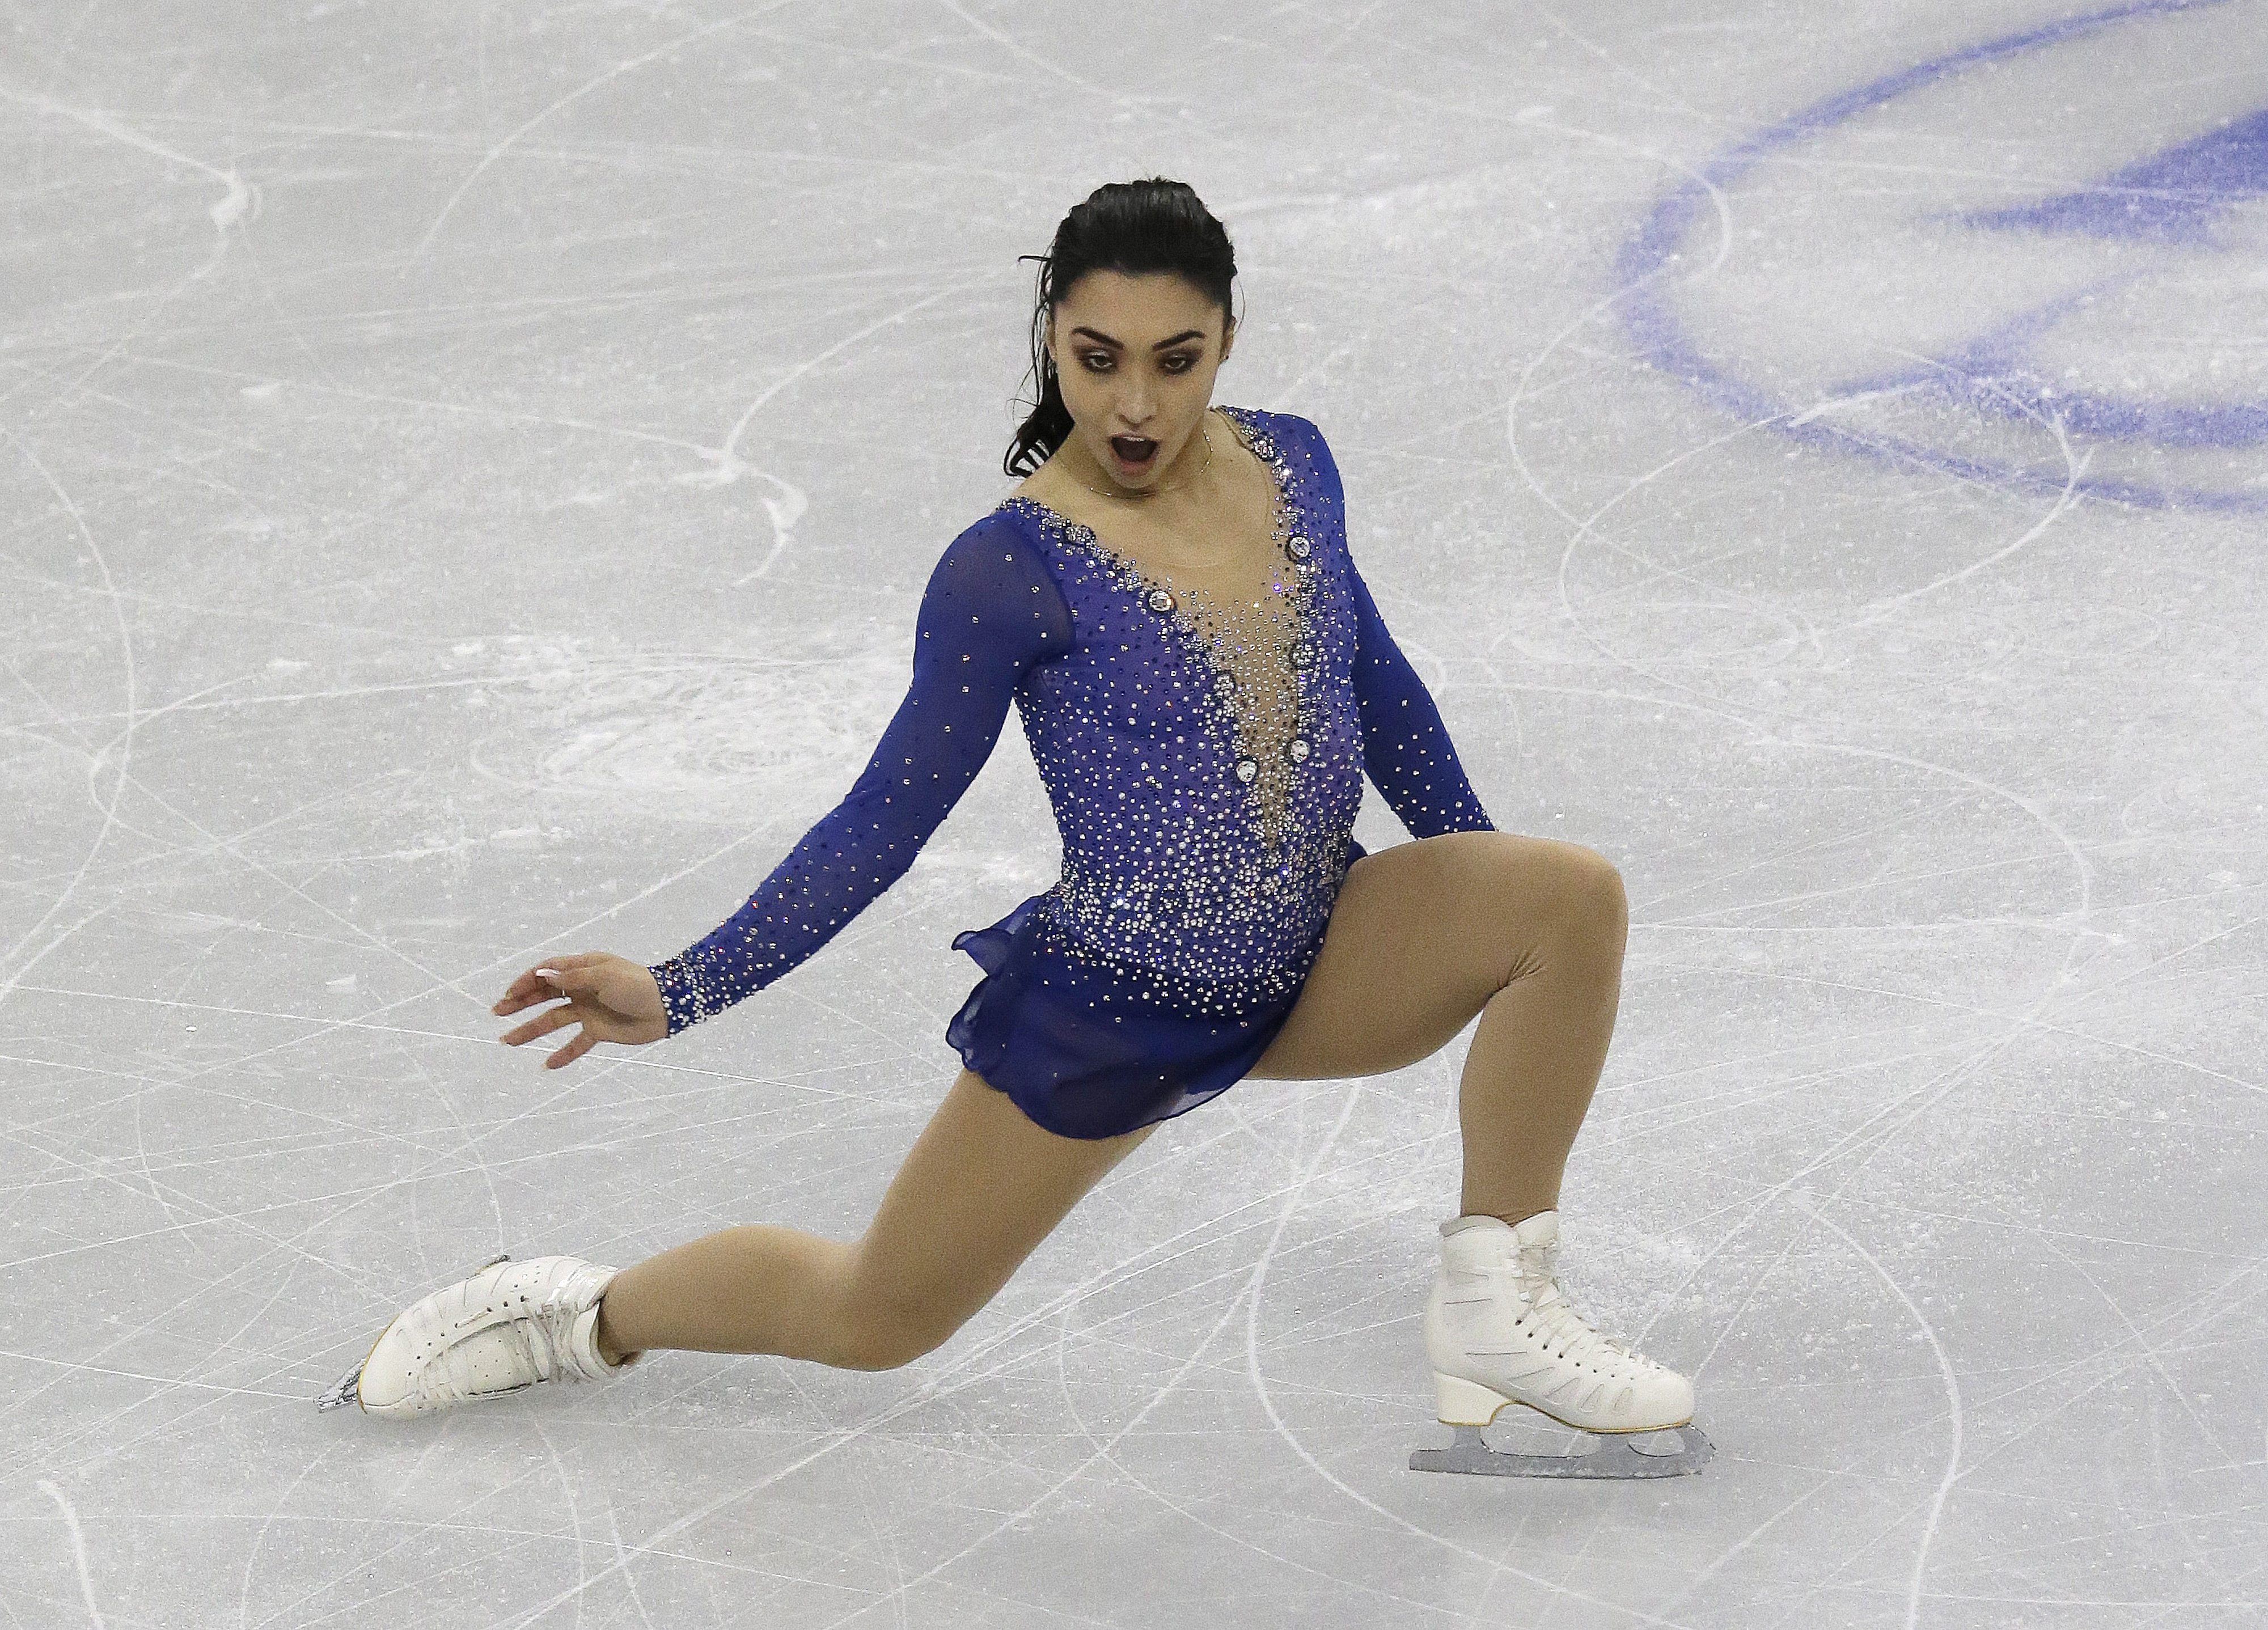 Silver medalist Gabrielle Daleman of Canada competes in the Ladies Free Skating at the ISU Four Continents Figure Skating Championships in Gangneung, South Korea, Saturday, Feb. 18, 2017. (AP Photo/Ahn Young-joon)